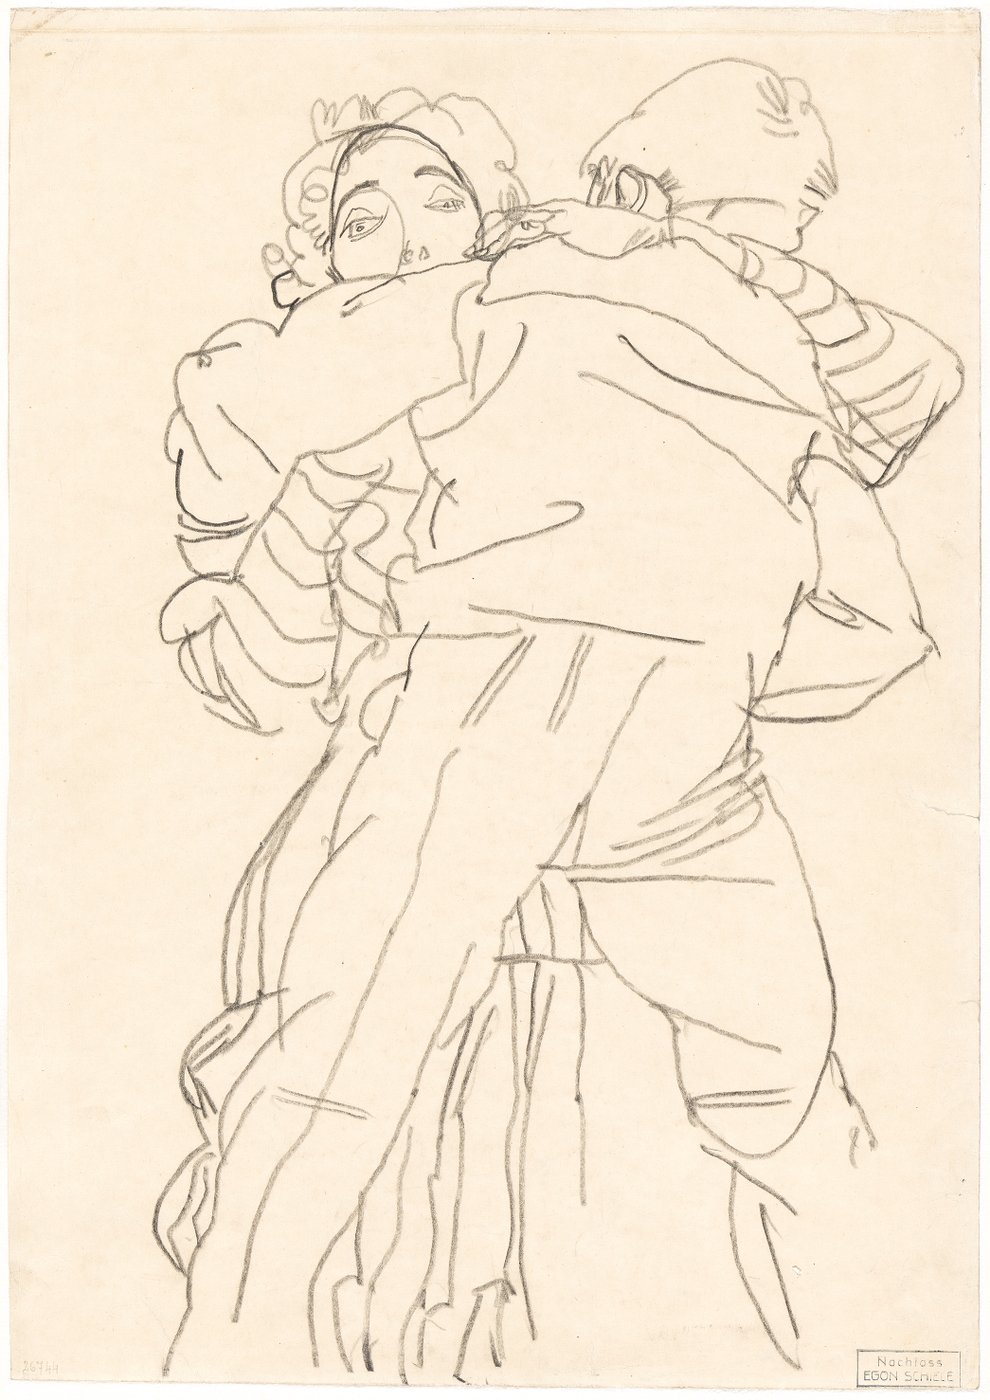 A rough pencil drawing showing a dancing couple from head to shins. A man is depicted with his back to us. He is embraced by a woman whose face is clearly visible over his shoulder. Her gaze is directed directly at us.